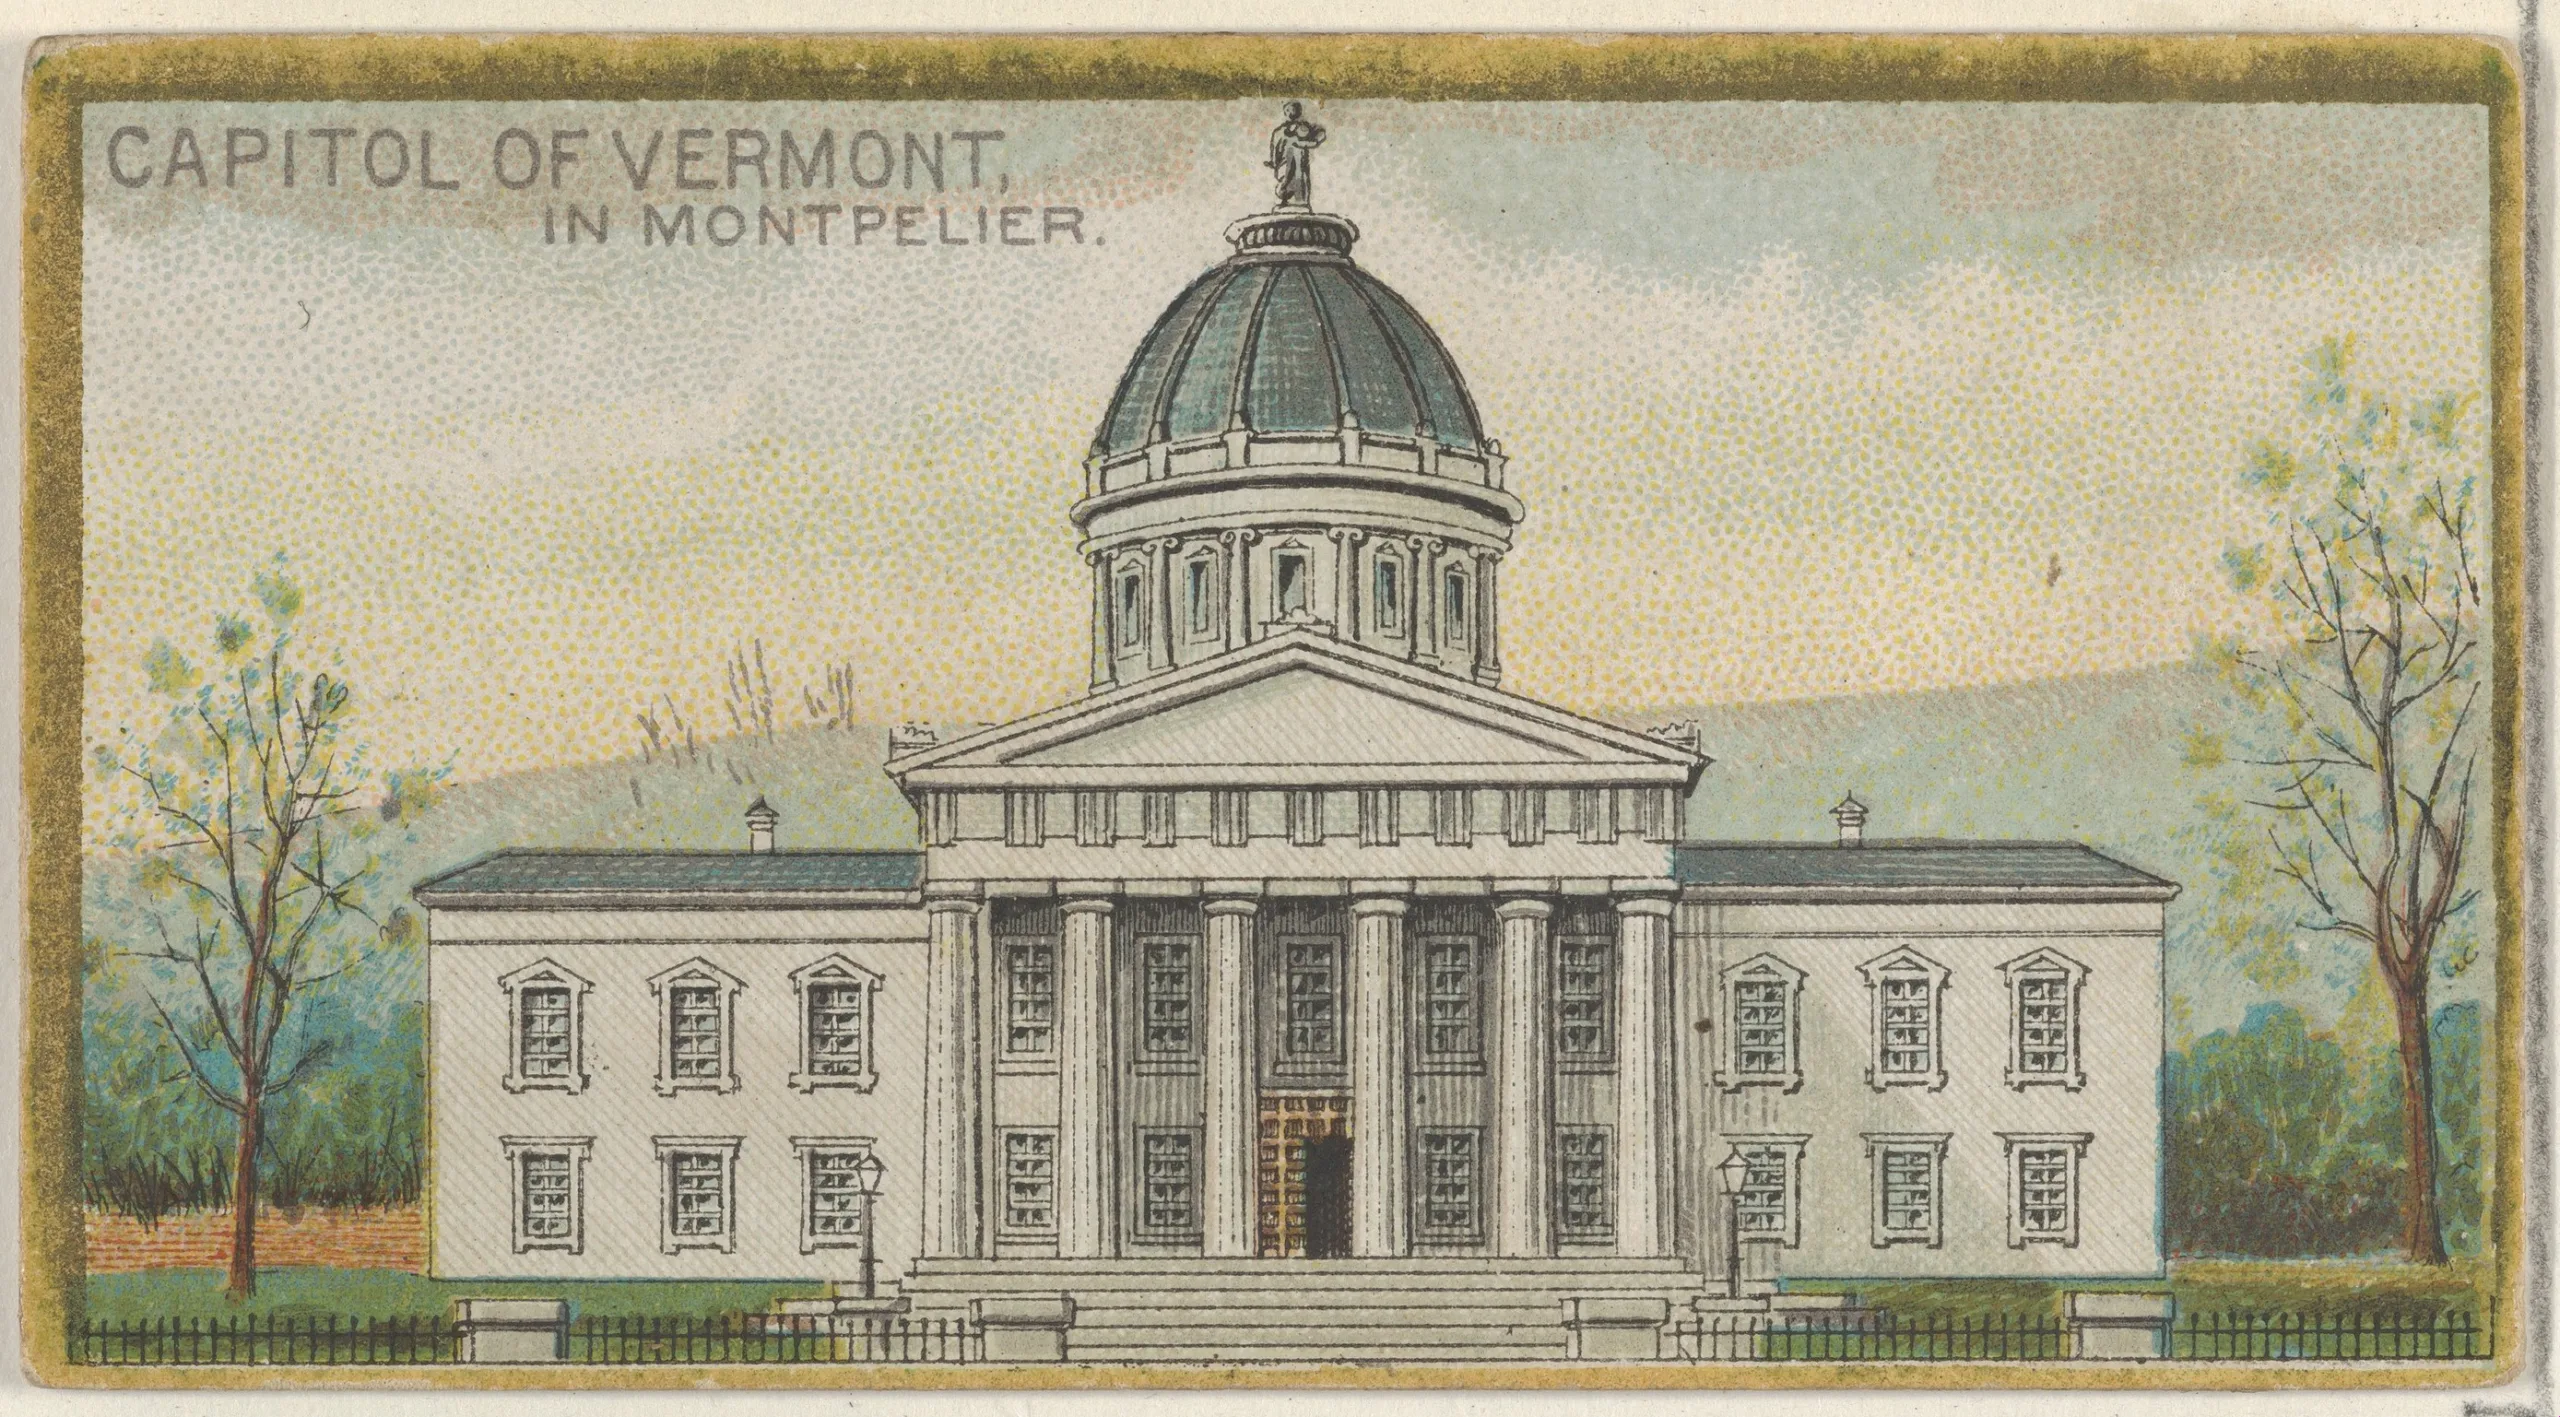 Capitol of Vermont in Montpelier, from the General Government and State Capitol Buildings series (N14) for Allen & Ginter Cigarettes Brands